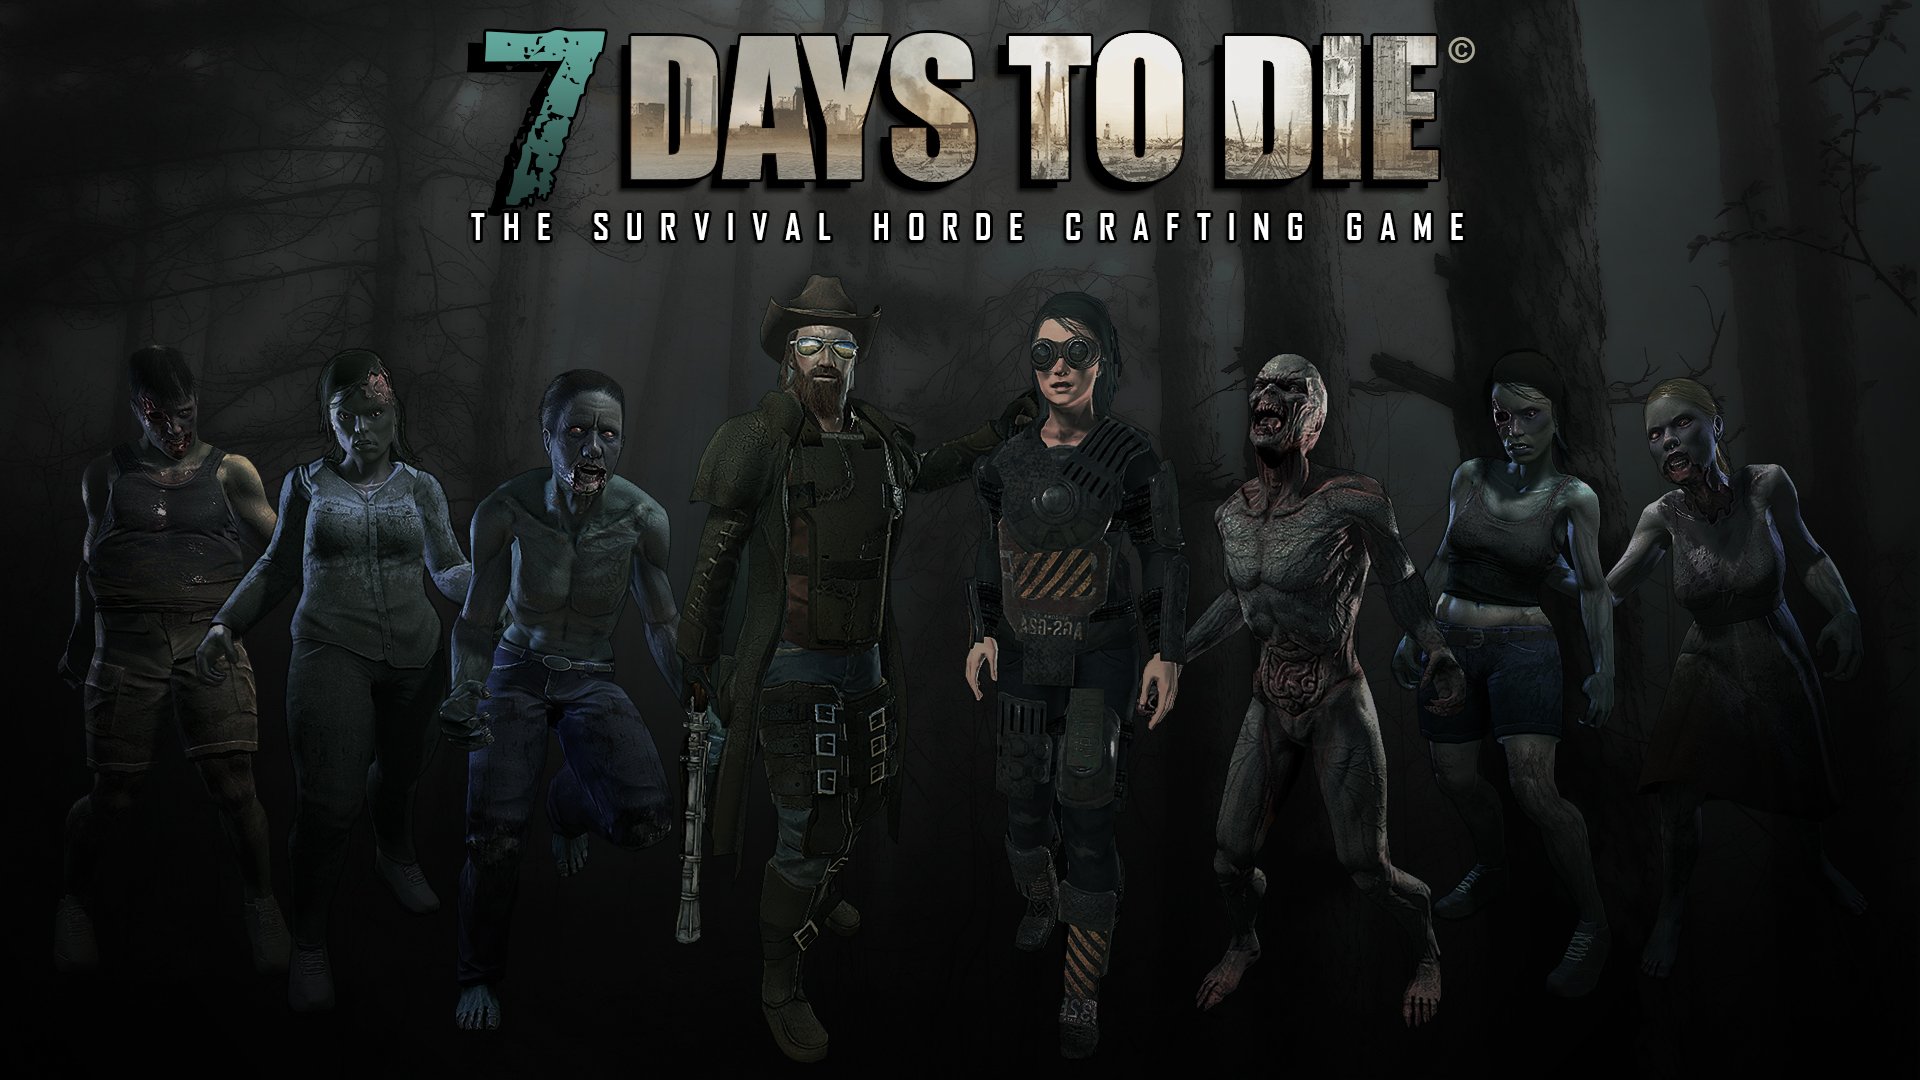 Afsnit Turist spille klaver 7 Days to Die will hit consoles in the coming month | Gamespresso